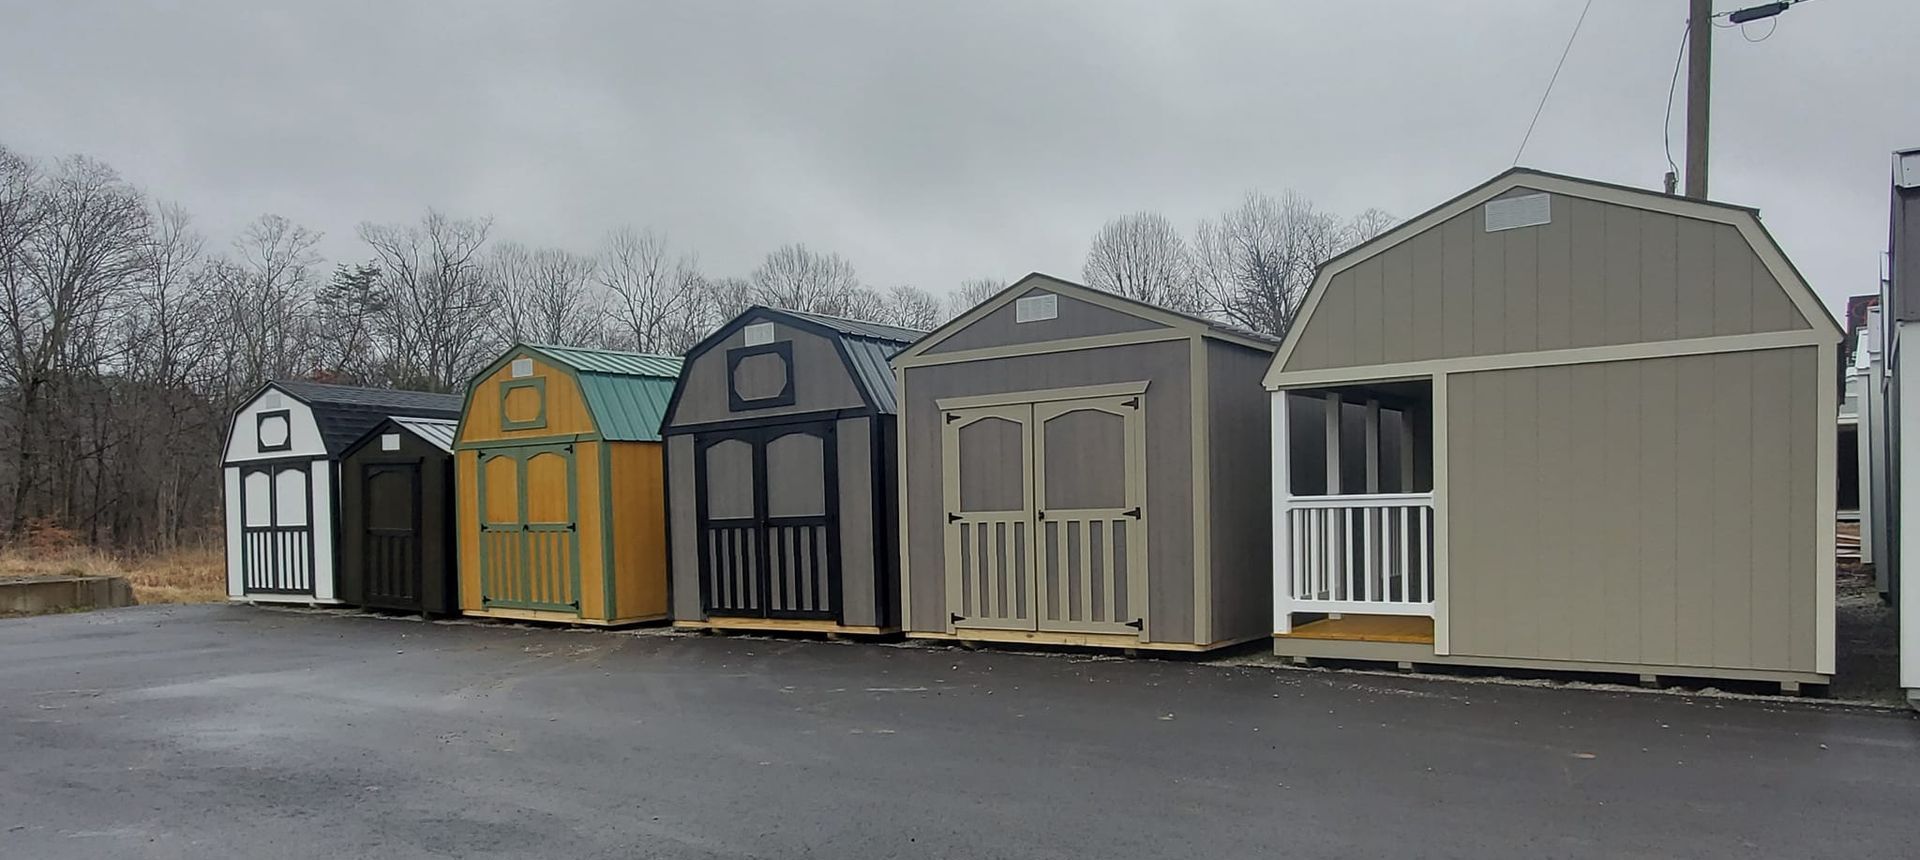 sheds, portable buildings and more